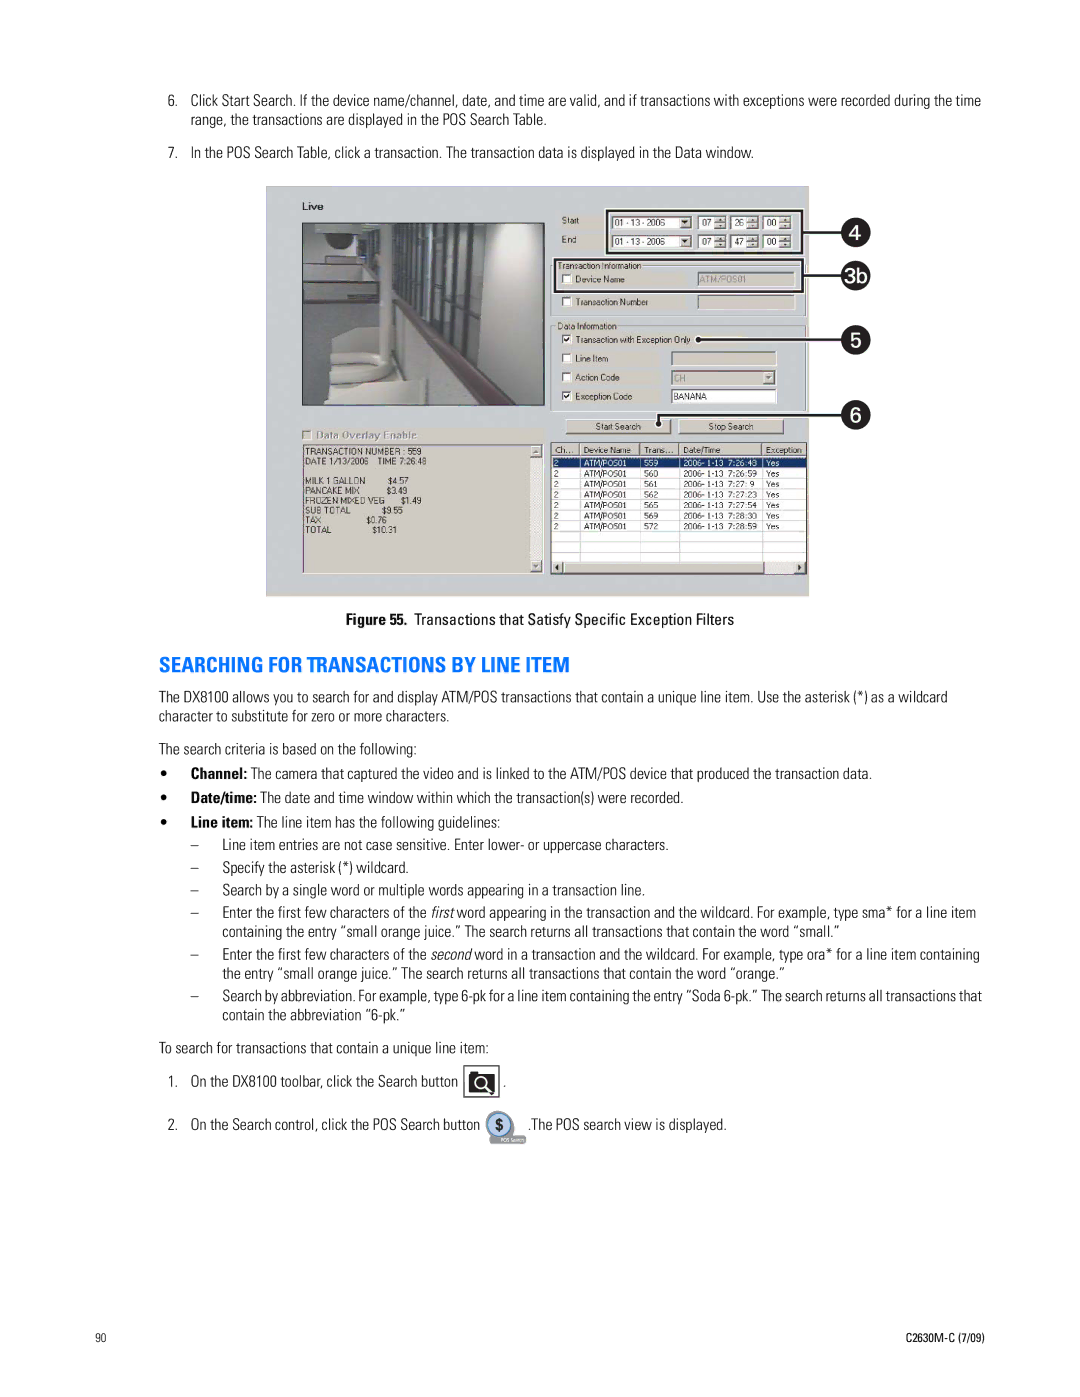 Pelco dx8100 manual Searching for Transactions by Line Item, Transactions that Satisfy Specific Exception Filters 